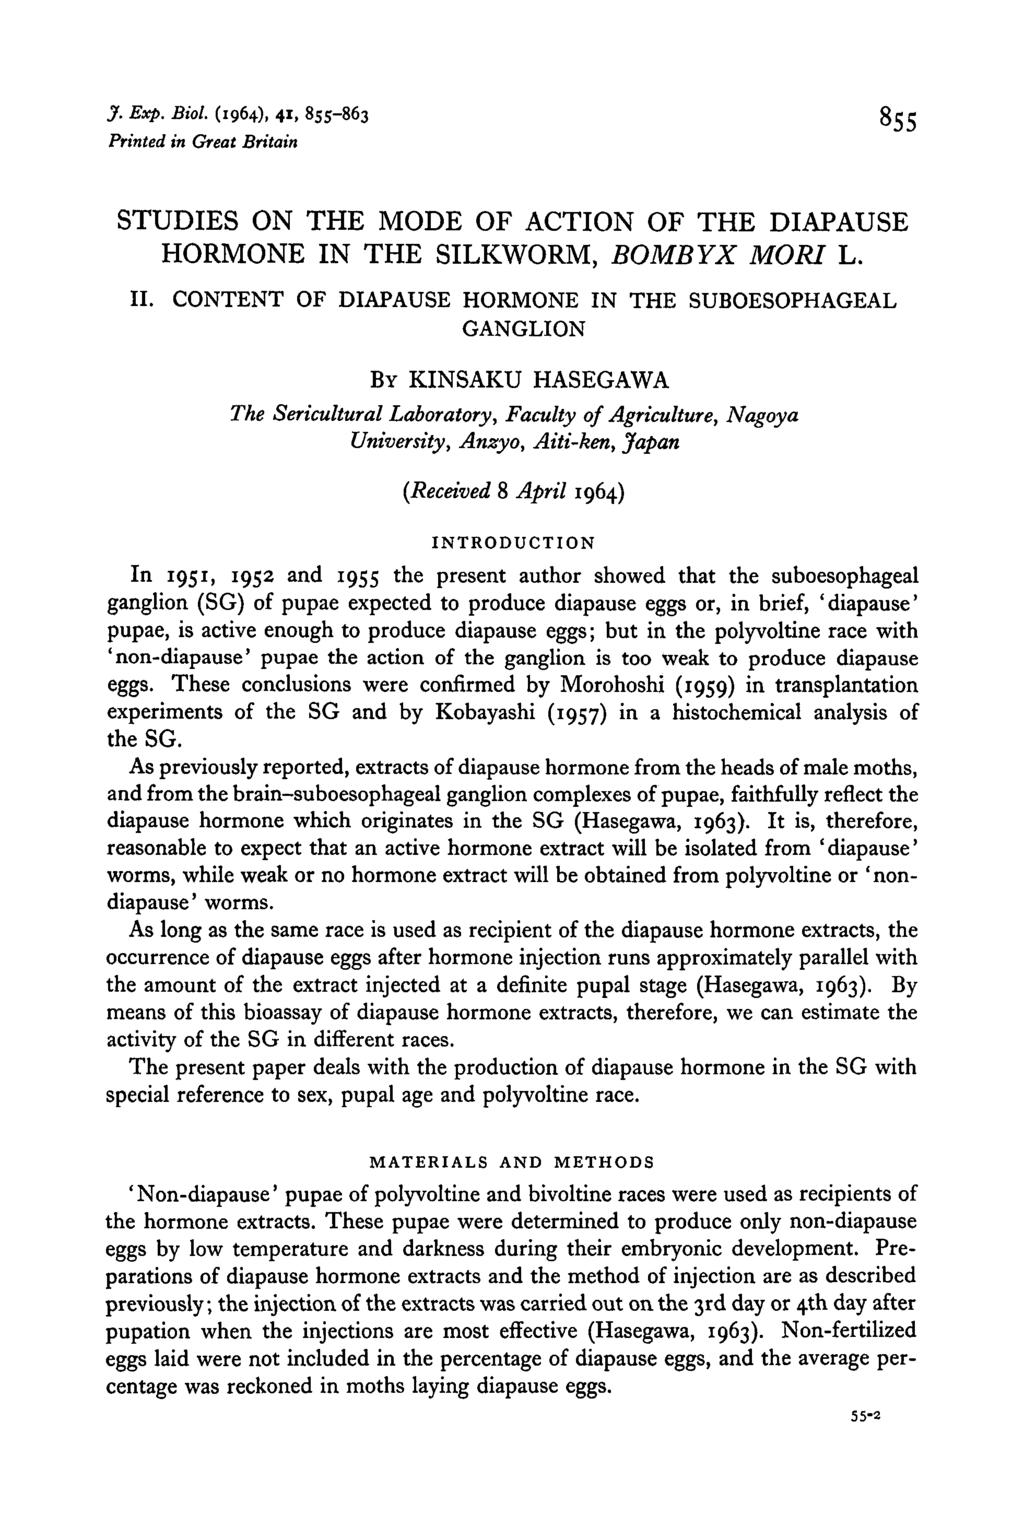 J. Exp. Biol. (4), 4, 55-55 Printed in Great Britain STUDIES ON THE MODE OF ACTION OF THE DIAPAUSE HORMONE IN THE SILKWORM, BOMBYX MORI L. II.